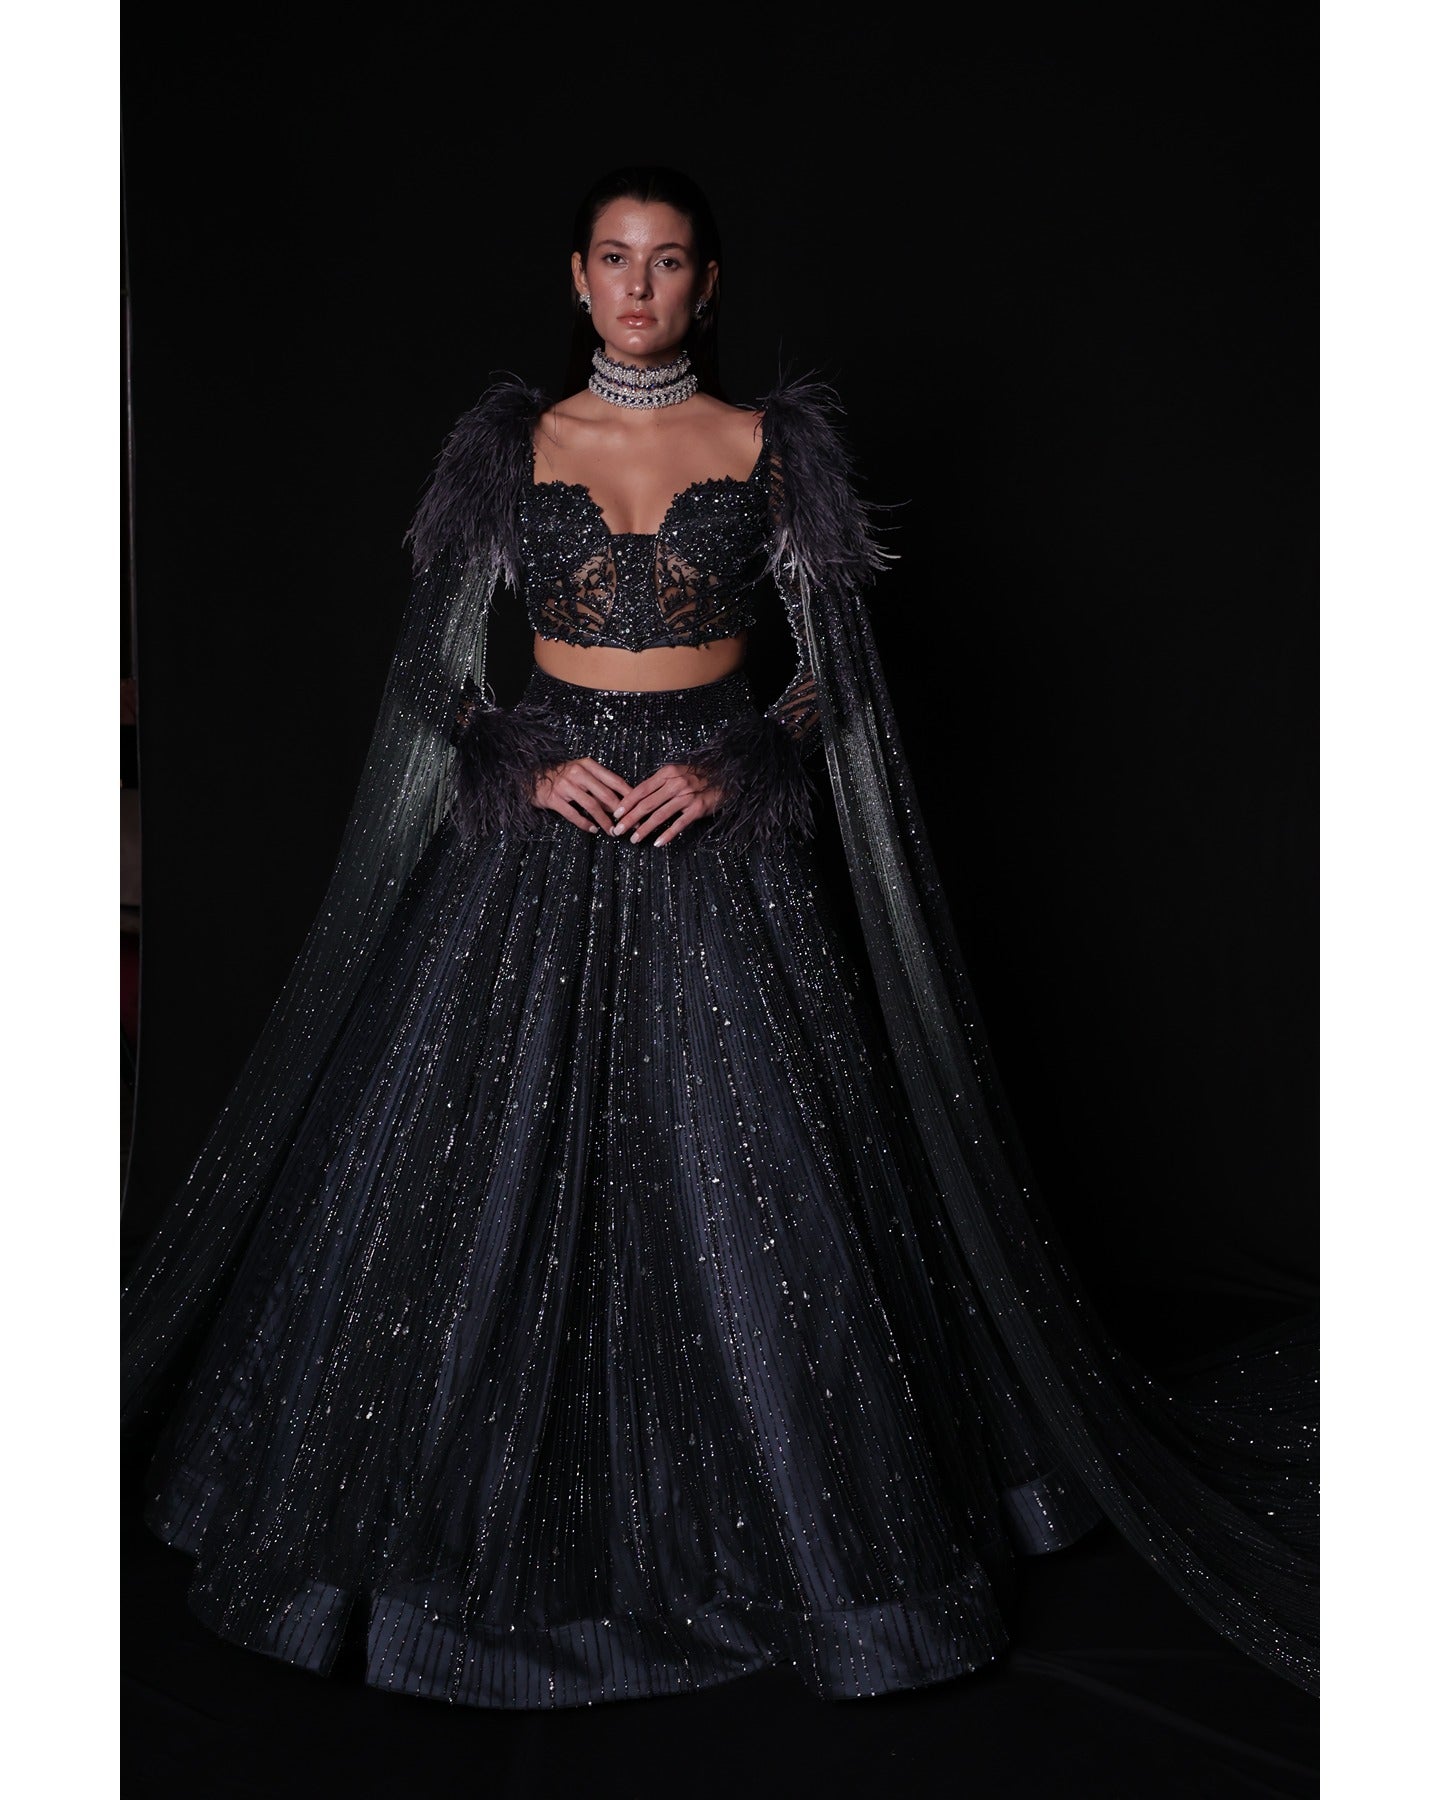 Draped in elegance, the Charcoal Blue Lehenga whispers tales of sophistication and grace. 